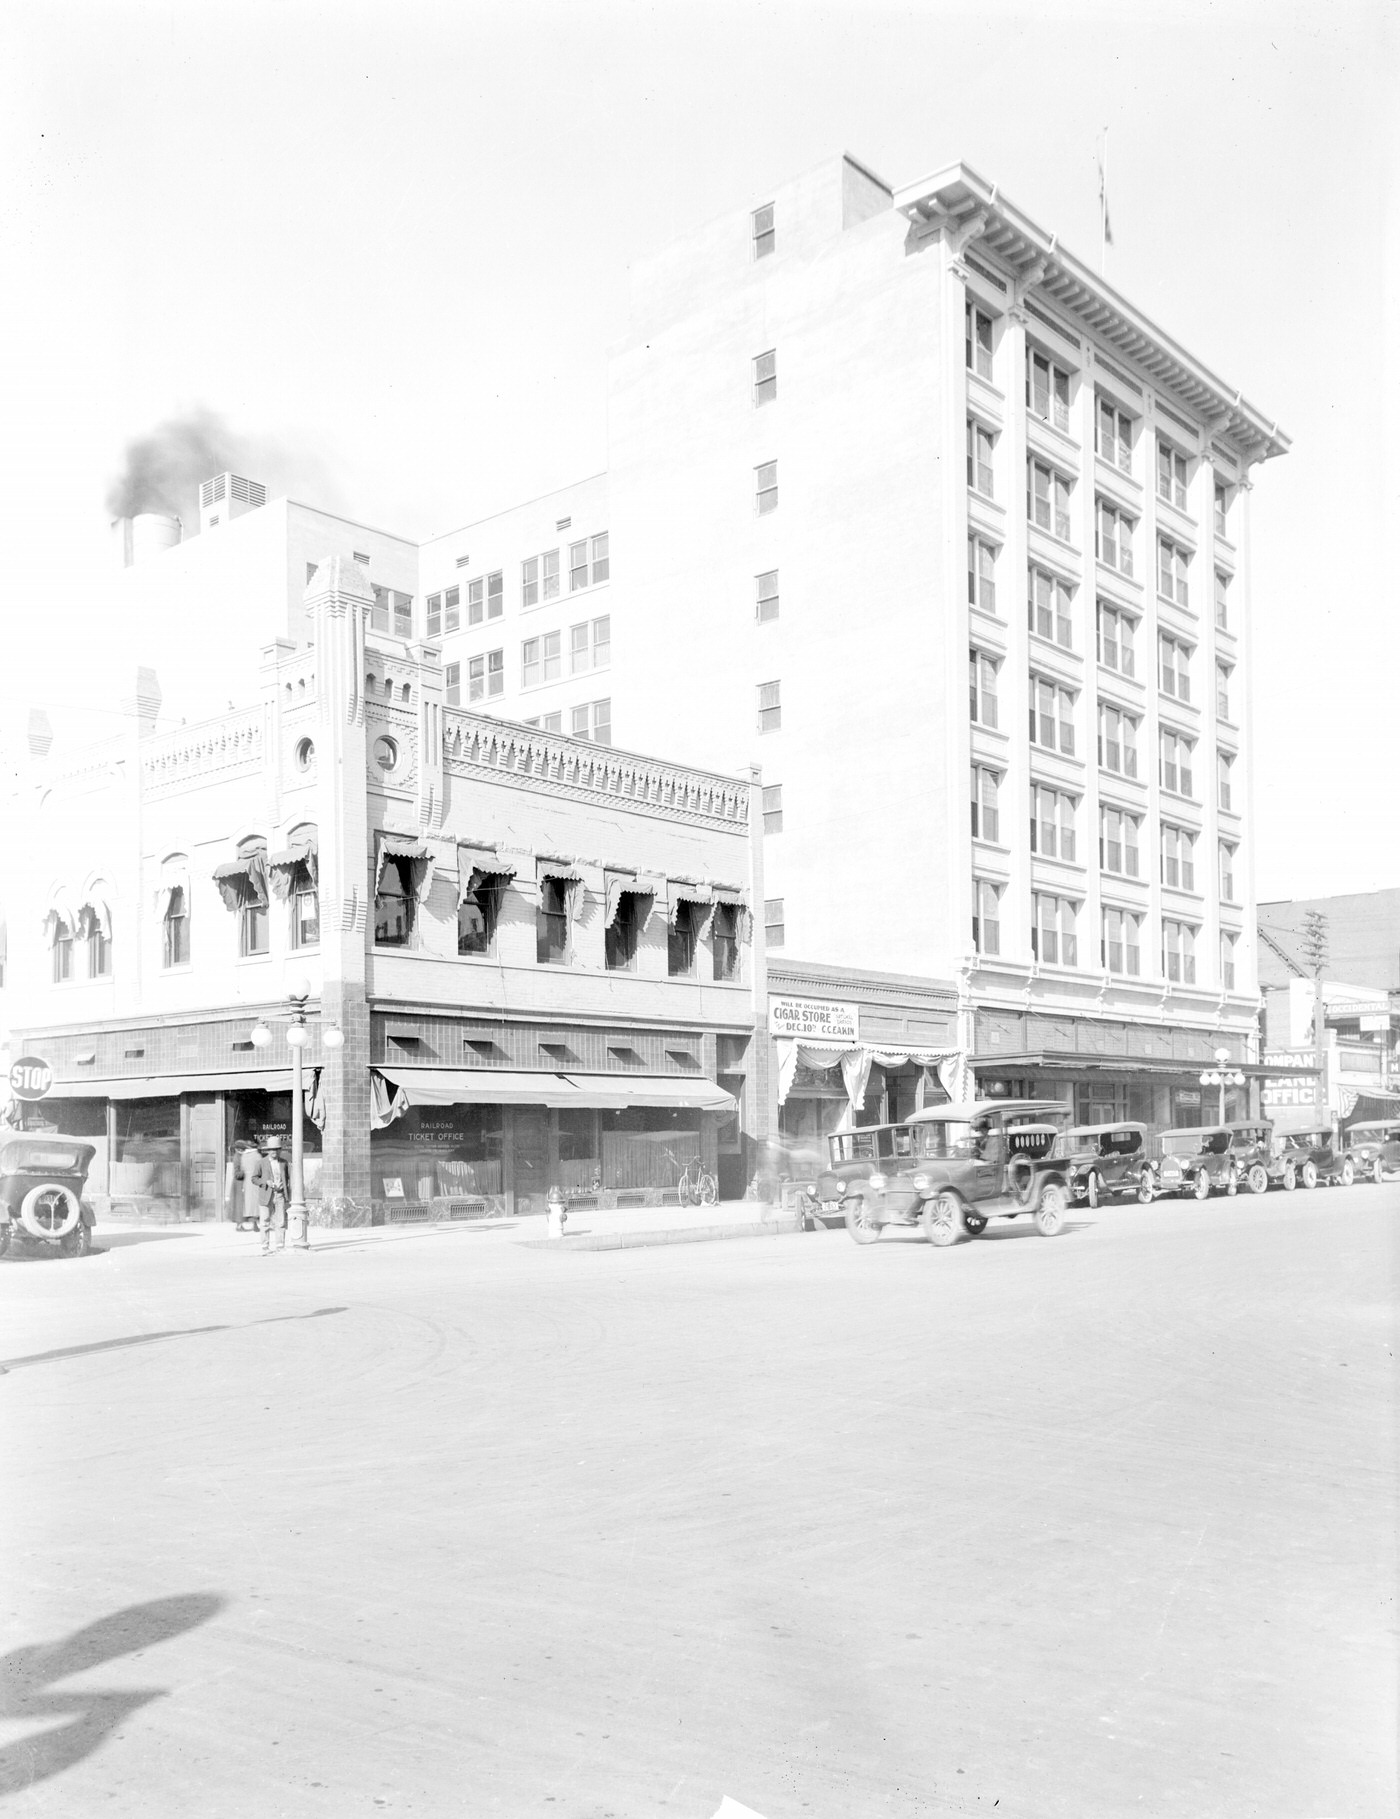 Heard Building Exterior, 1921. This building was located on the southeast corner of Central Avenue and Adams Street in Phoenix.